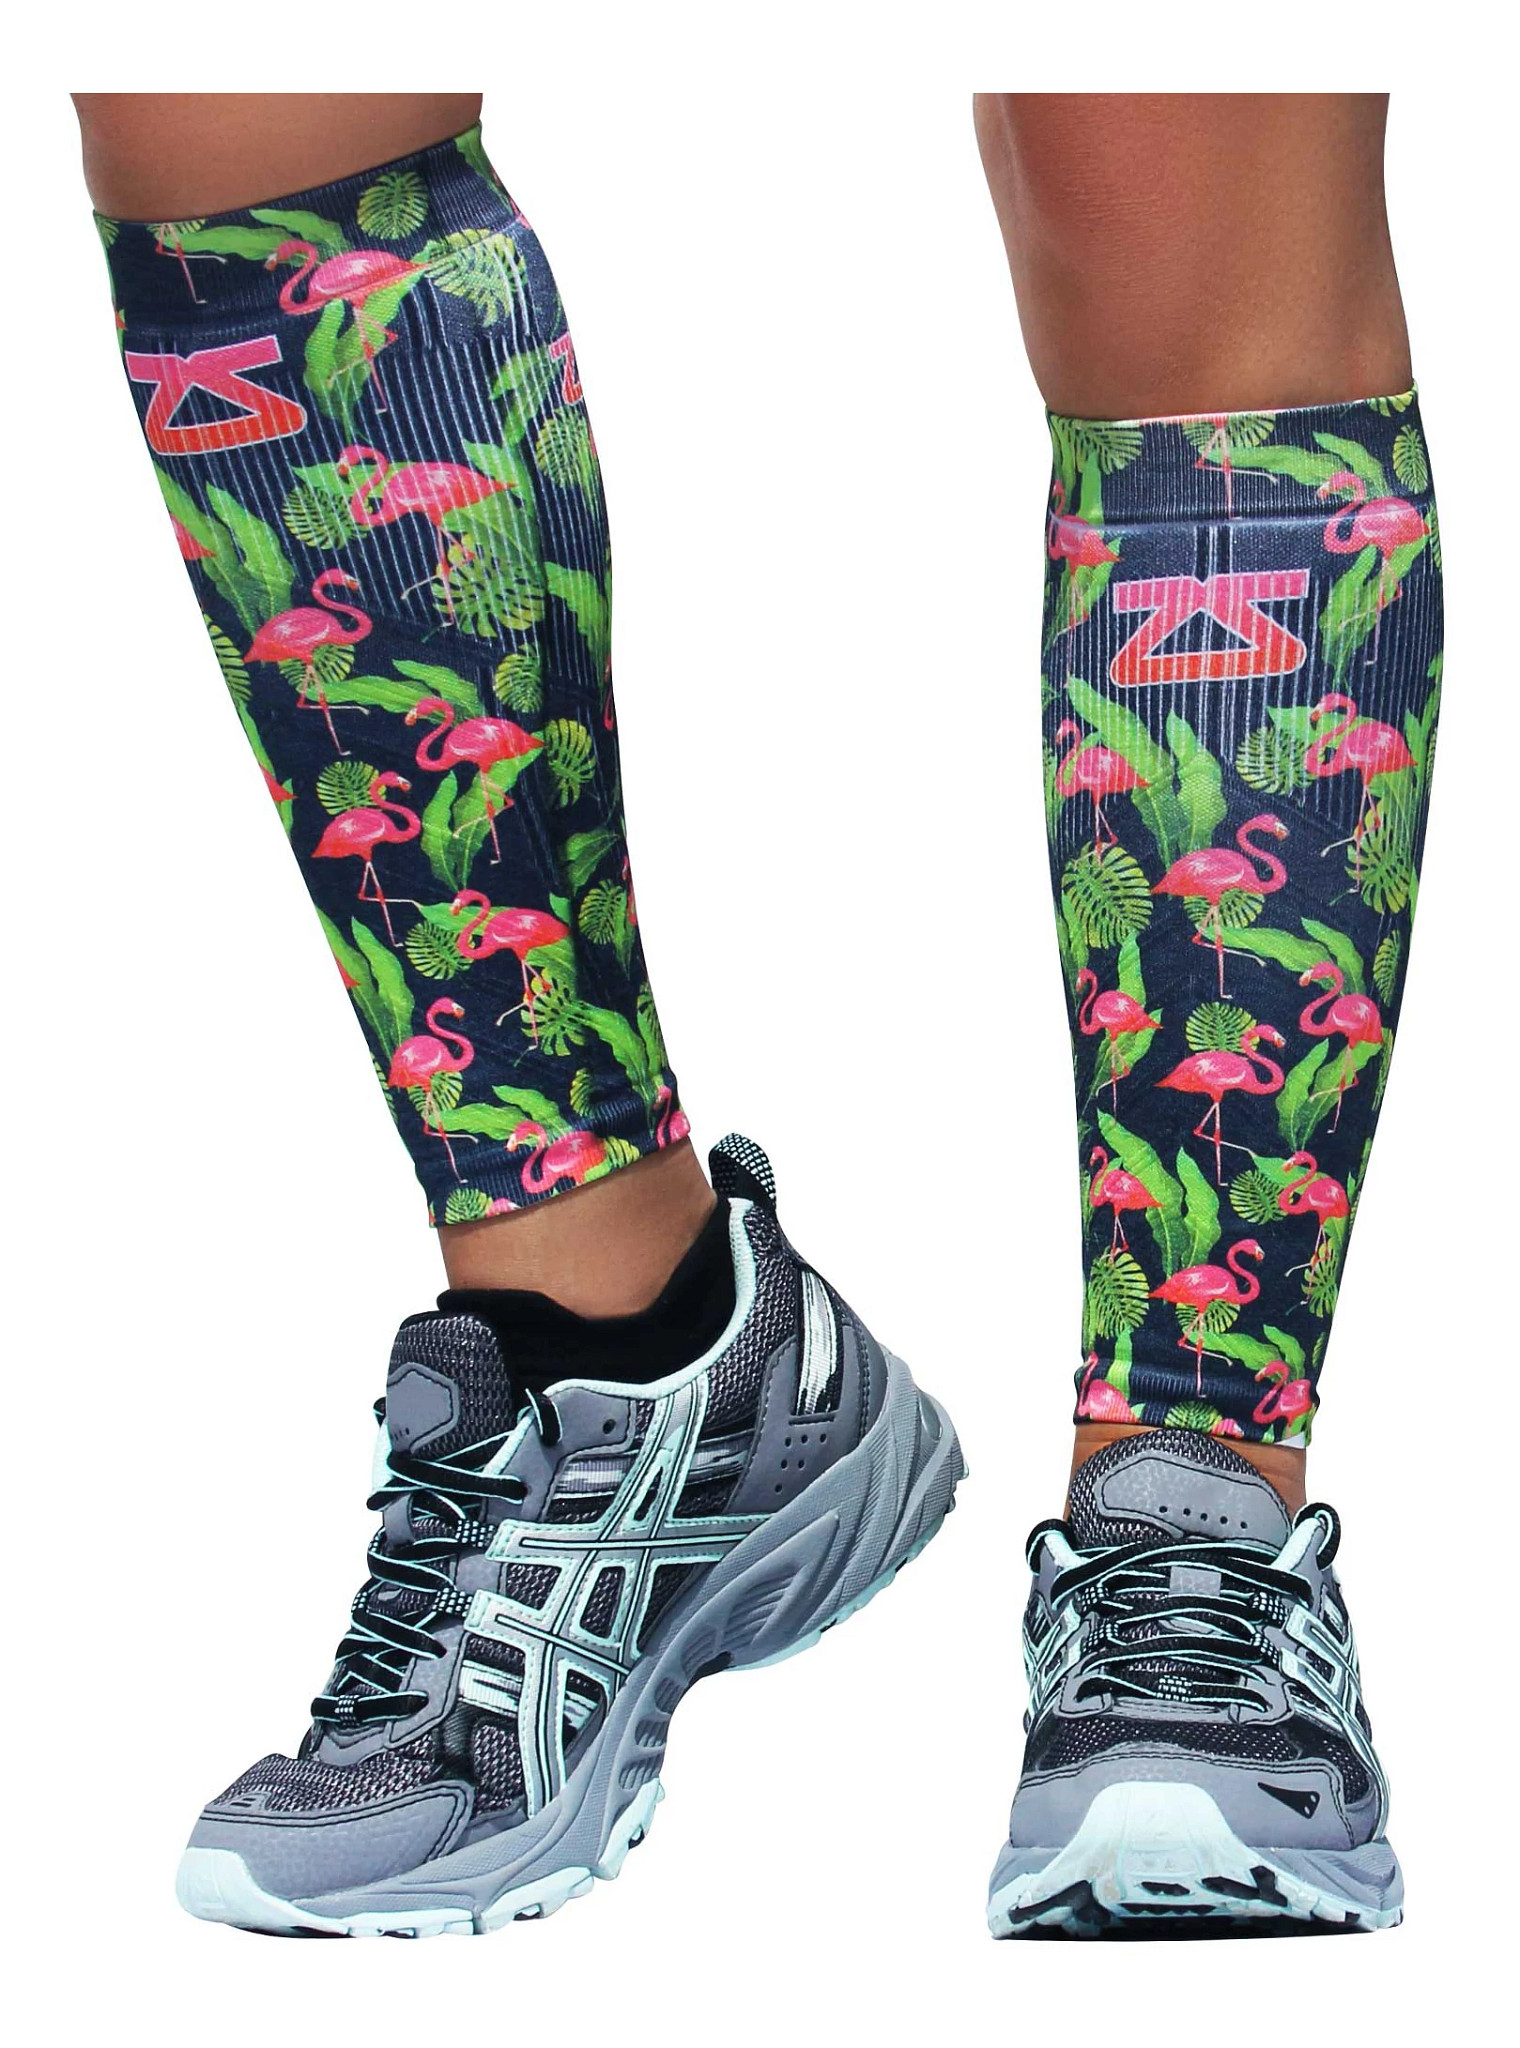 Zensah Featherweight Compression Leg Sleeves Injury Recovery